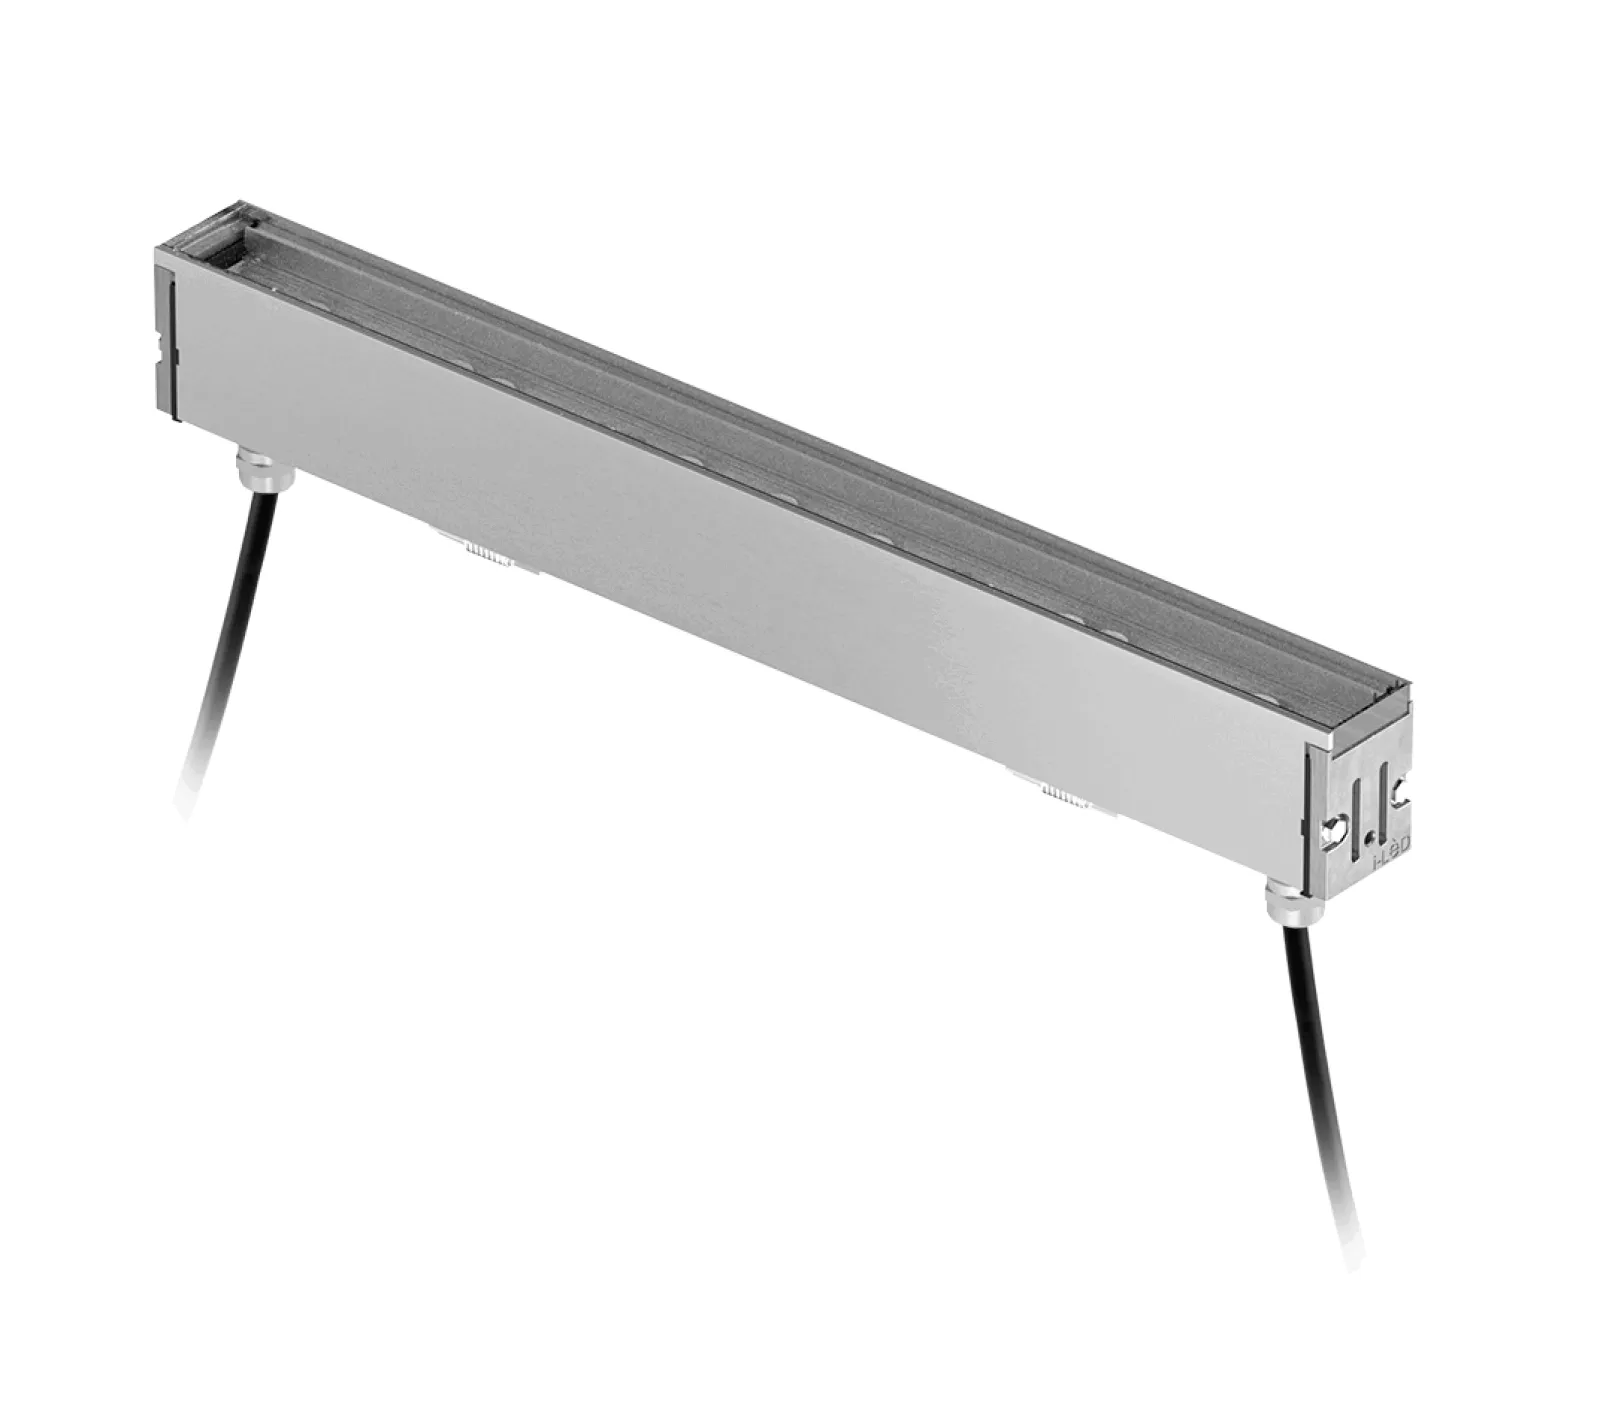 Lines - Xenia_AF - 82491N50 | Linea Light Group